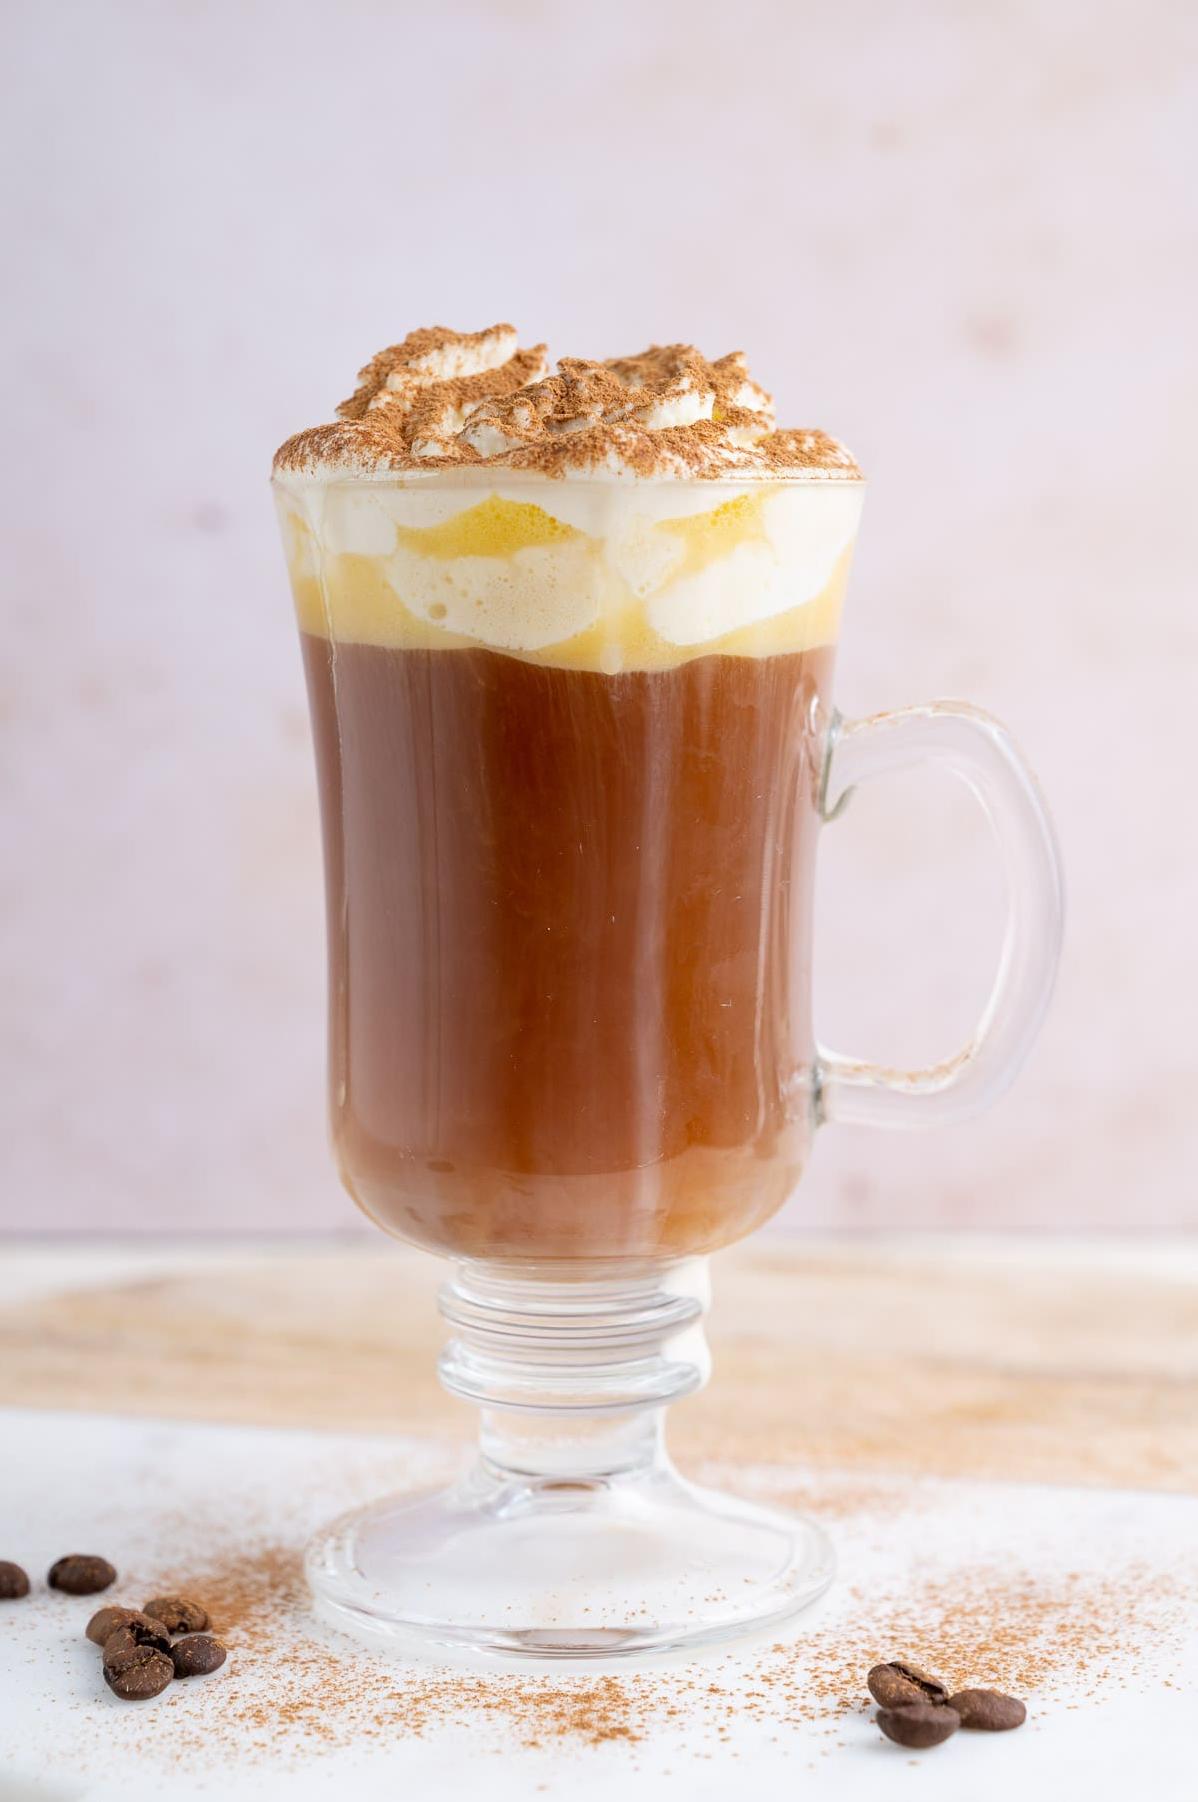  Give your taste buds a sweet, nutty treat with this Amaretto Coffee recipe.